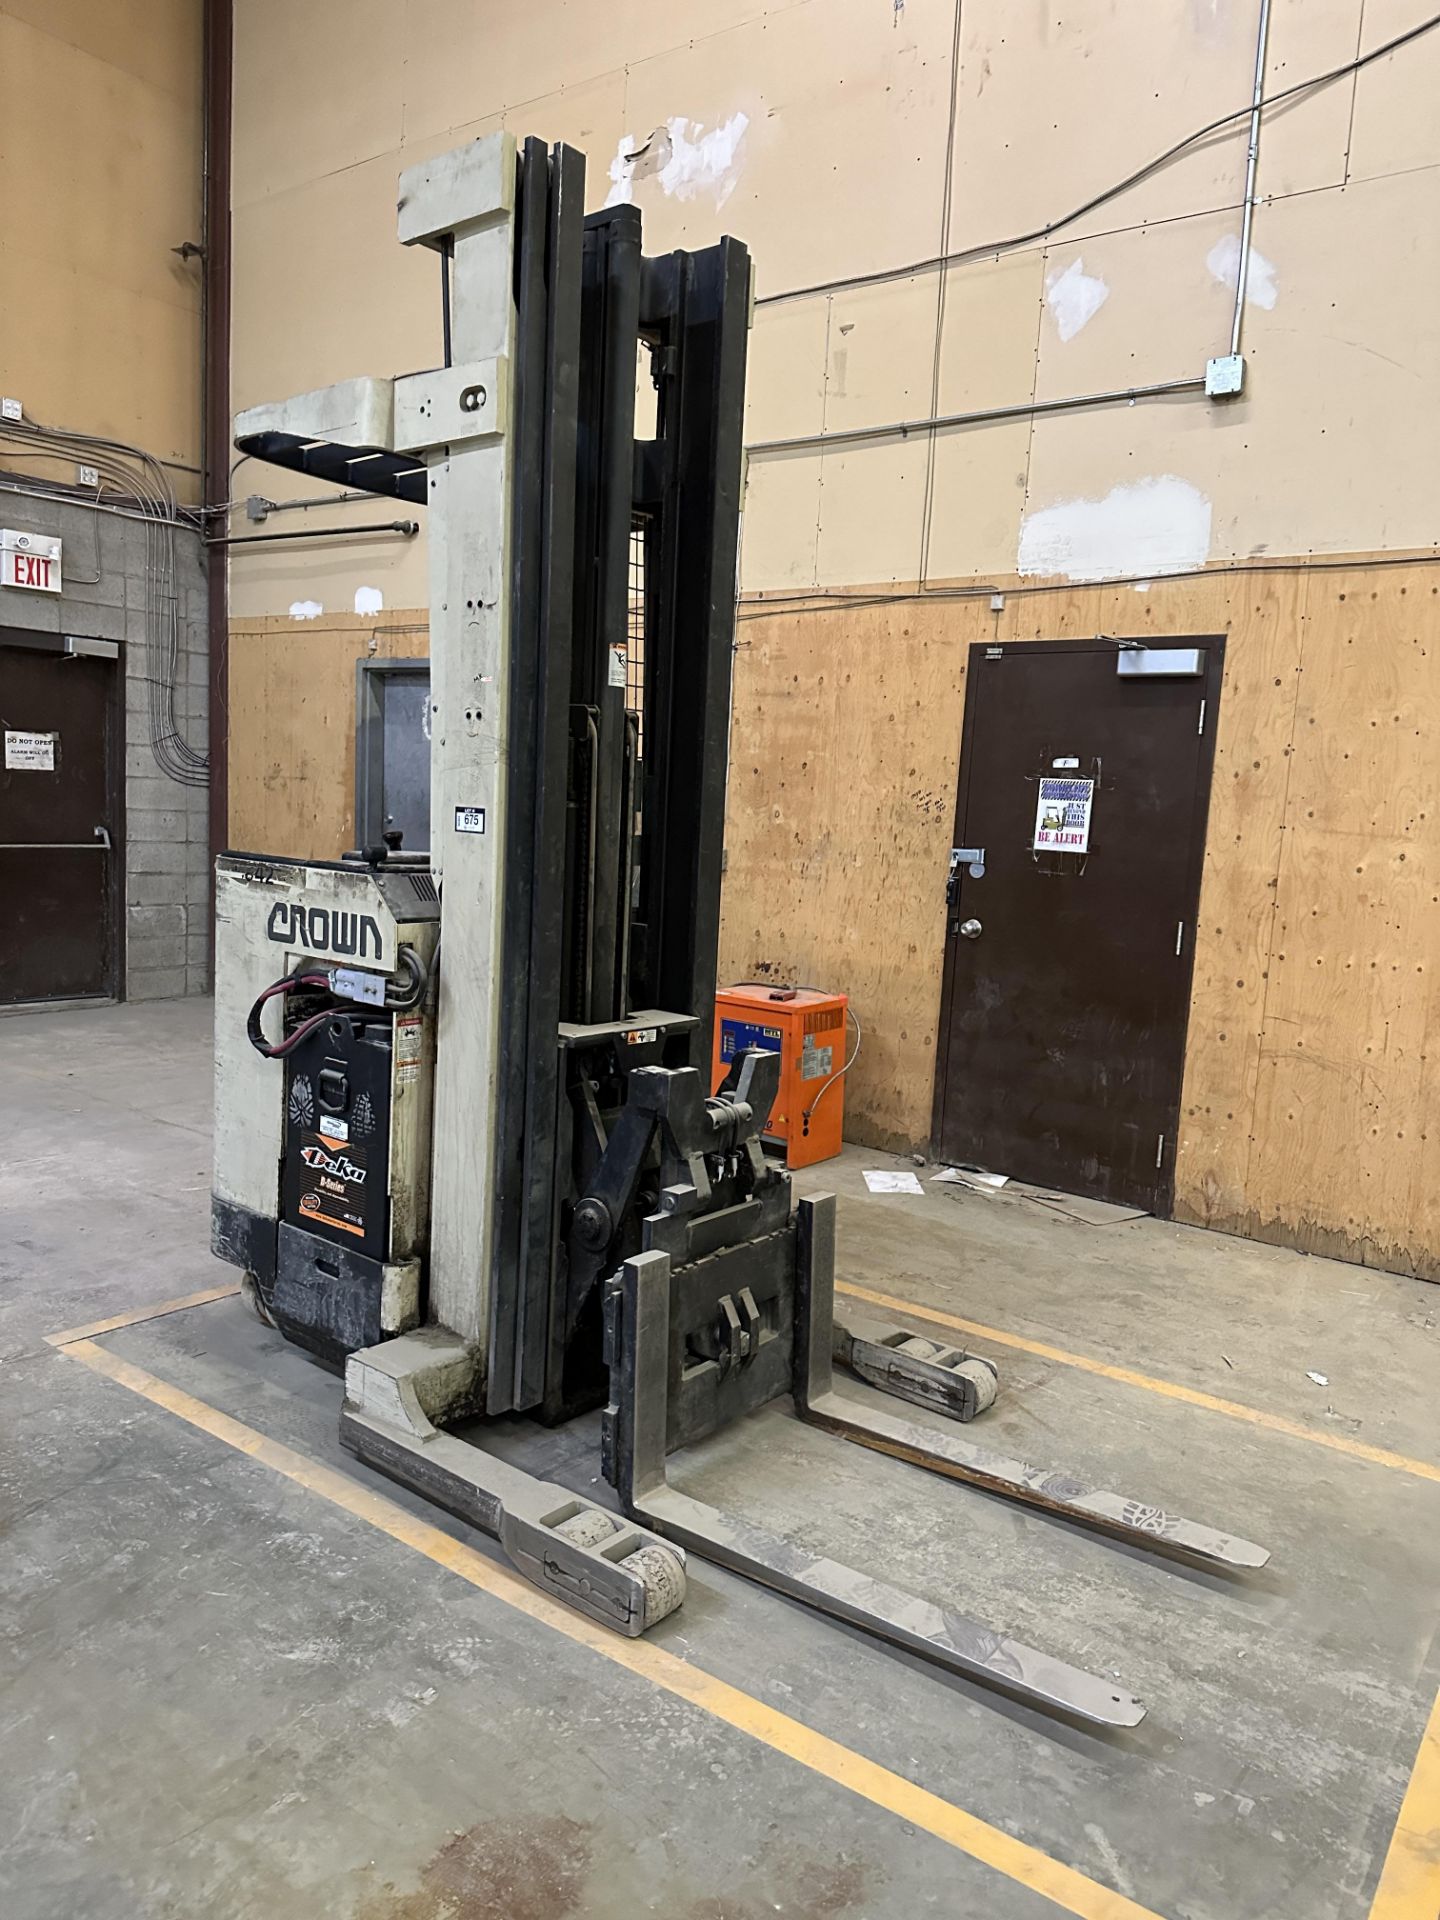 Crown RR 3000 Series Electric Stand-up Forklift ** DOES NOT OPERATE**